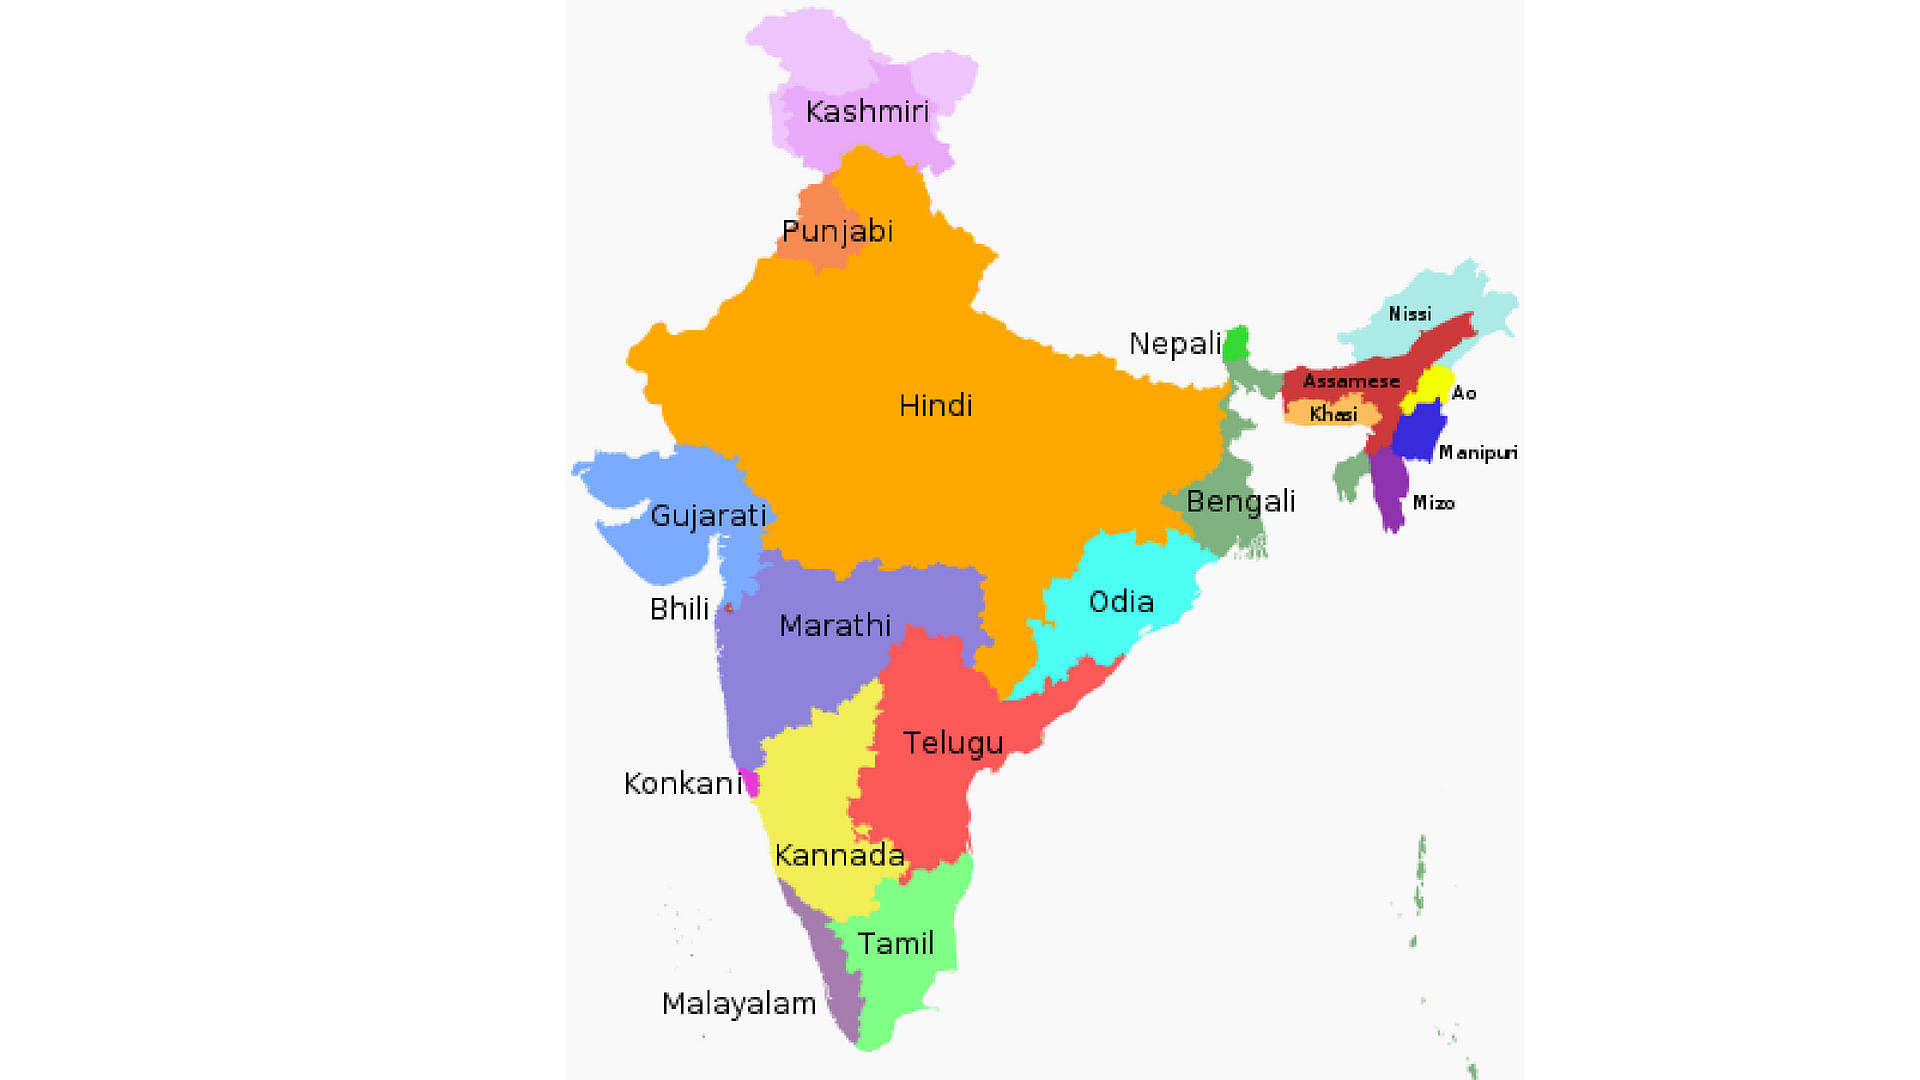 Owing to the higher population growth in the native Hindi speaking states, Hindi is now the mother tongue of 43.63 percent of Indians.